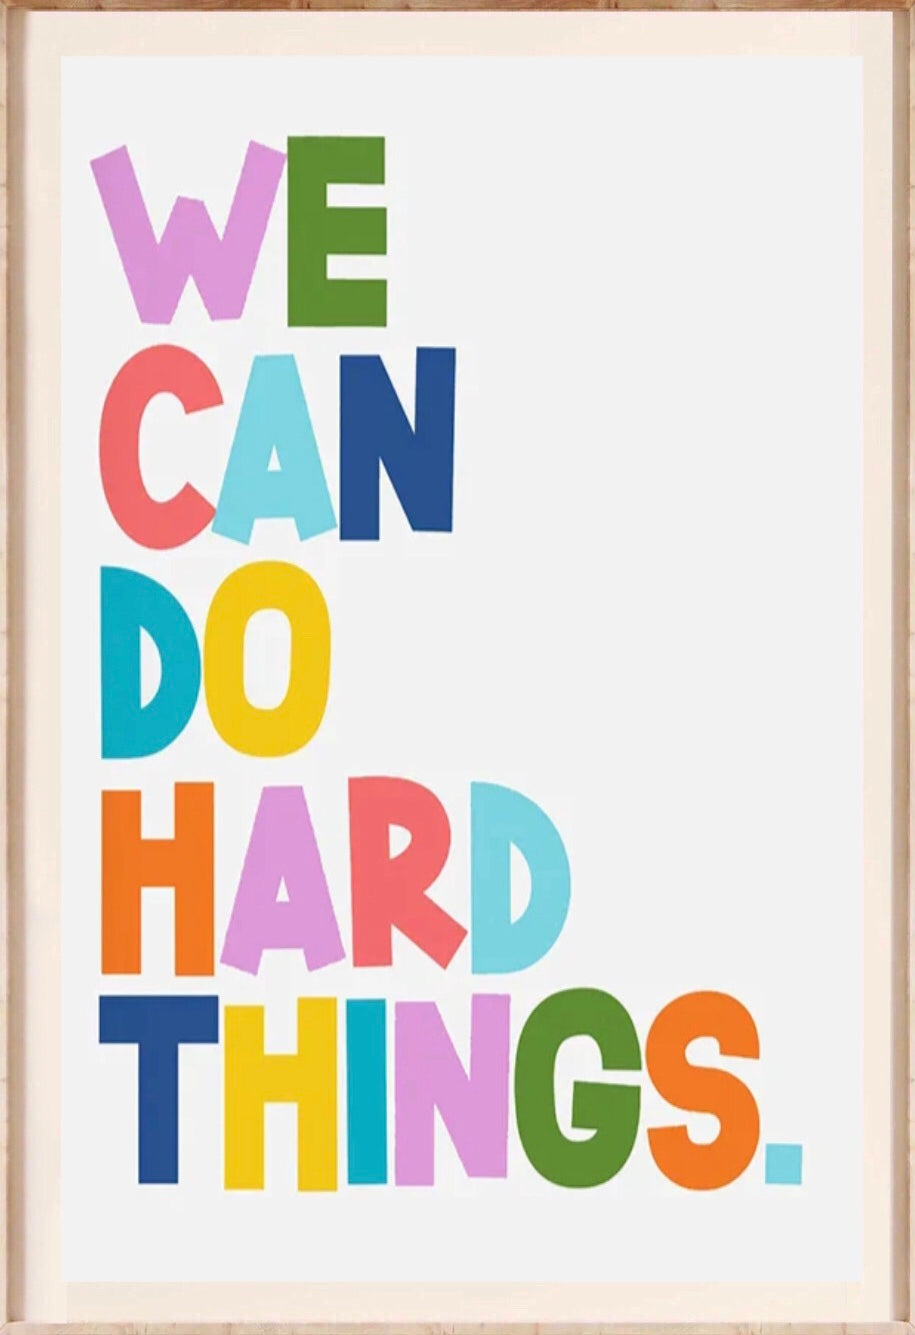 " we can do hard things " poster